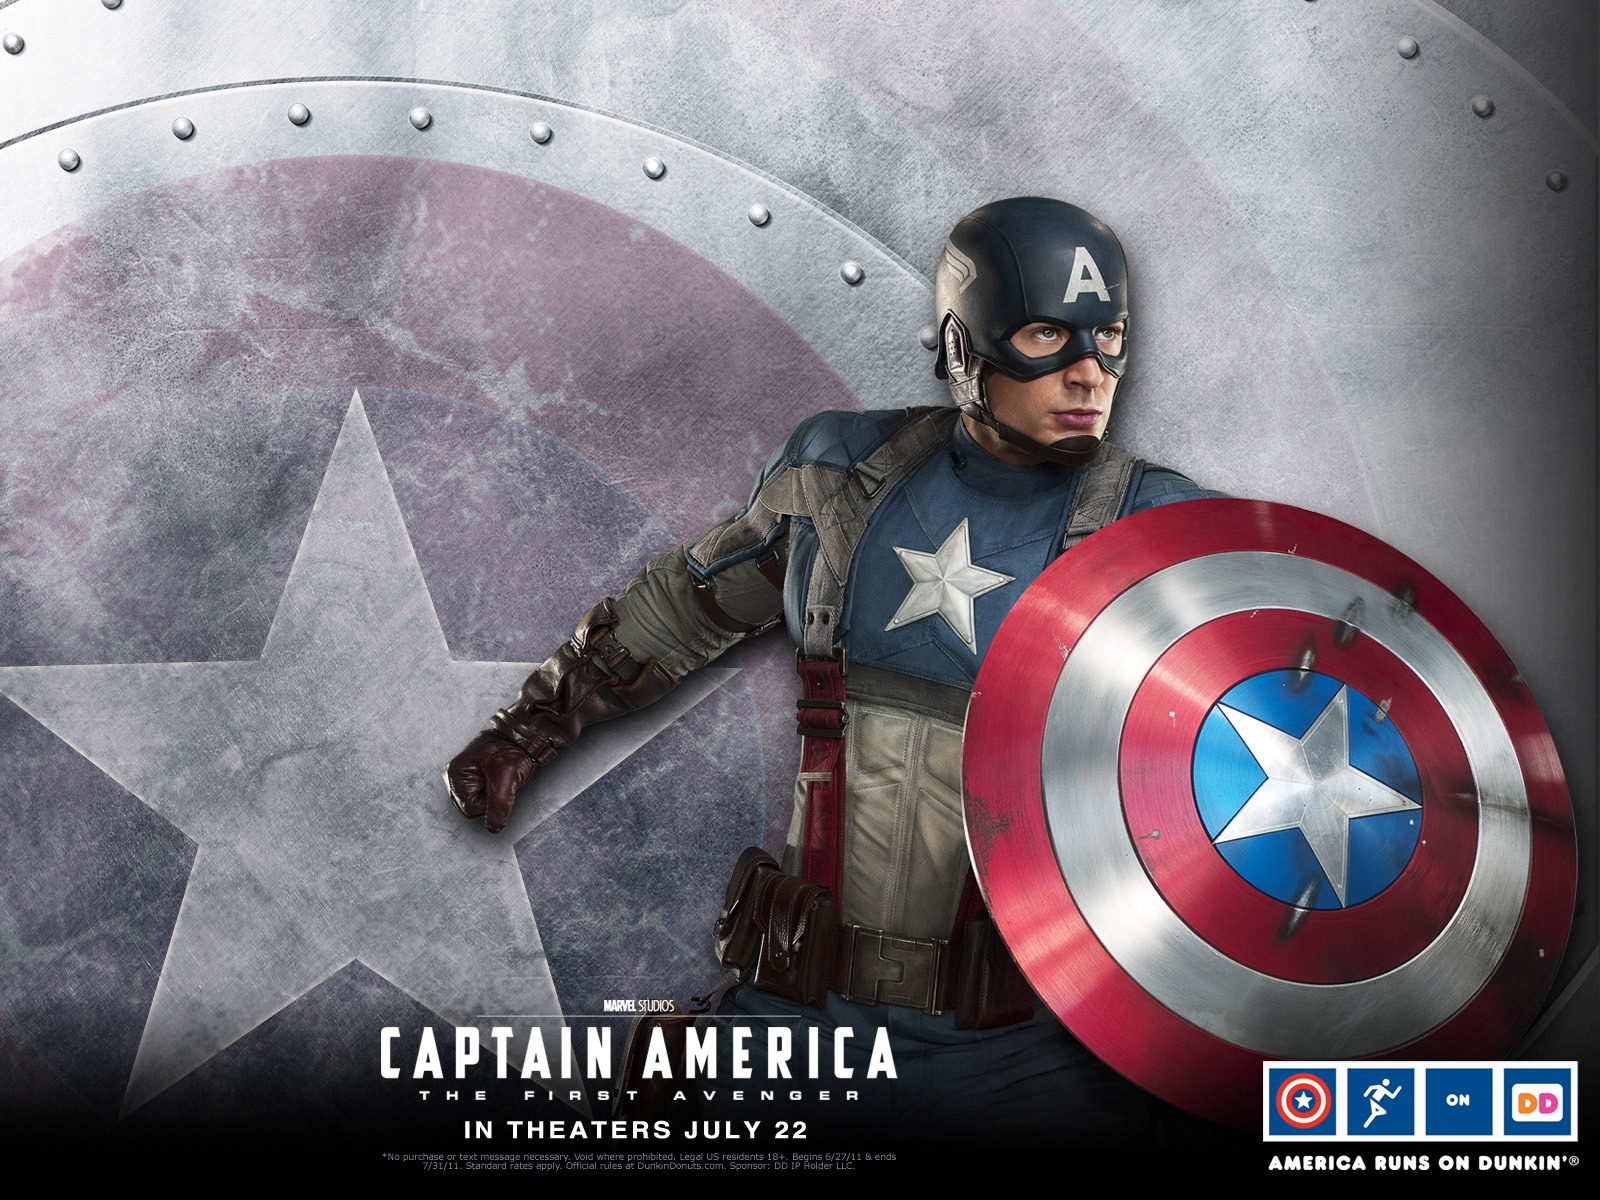 Captain America: The First Avenger wallpapers HD #6 - 1600x1200